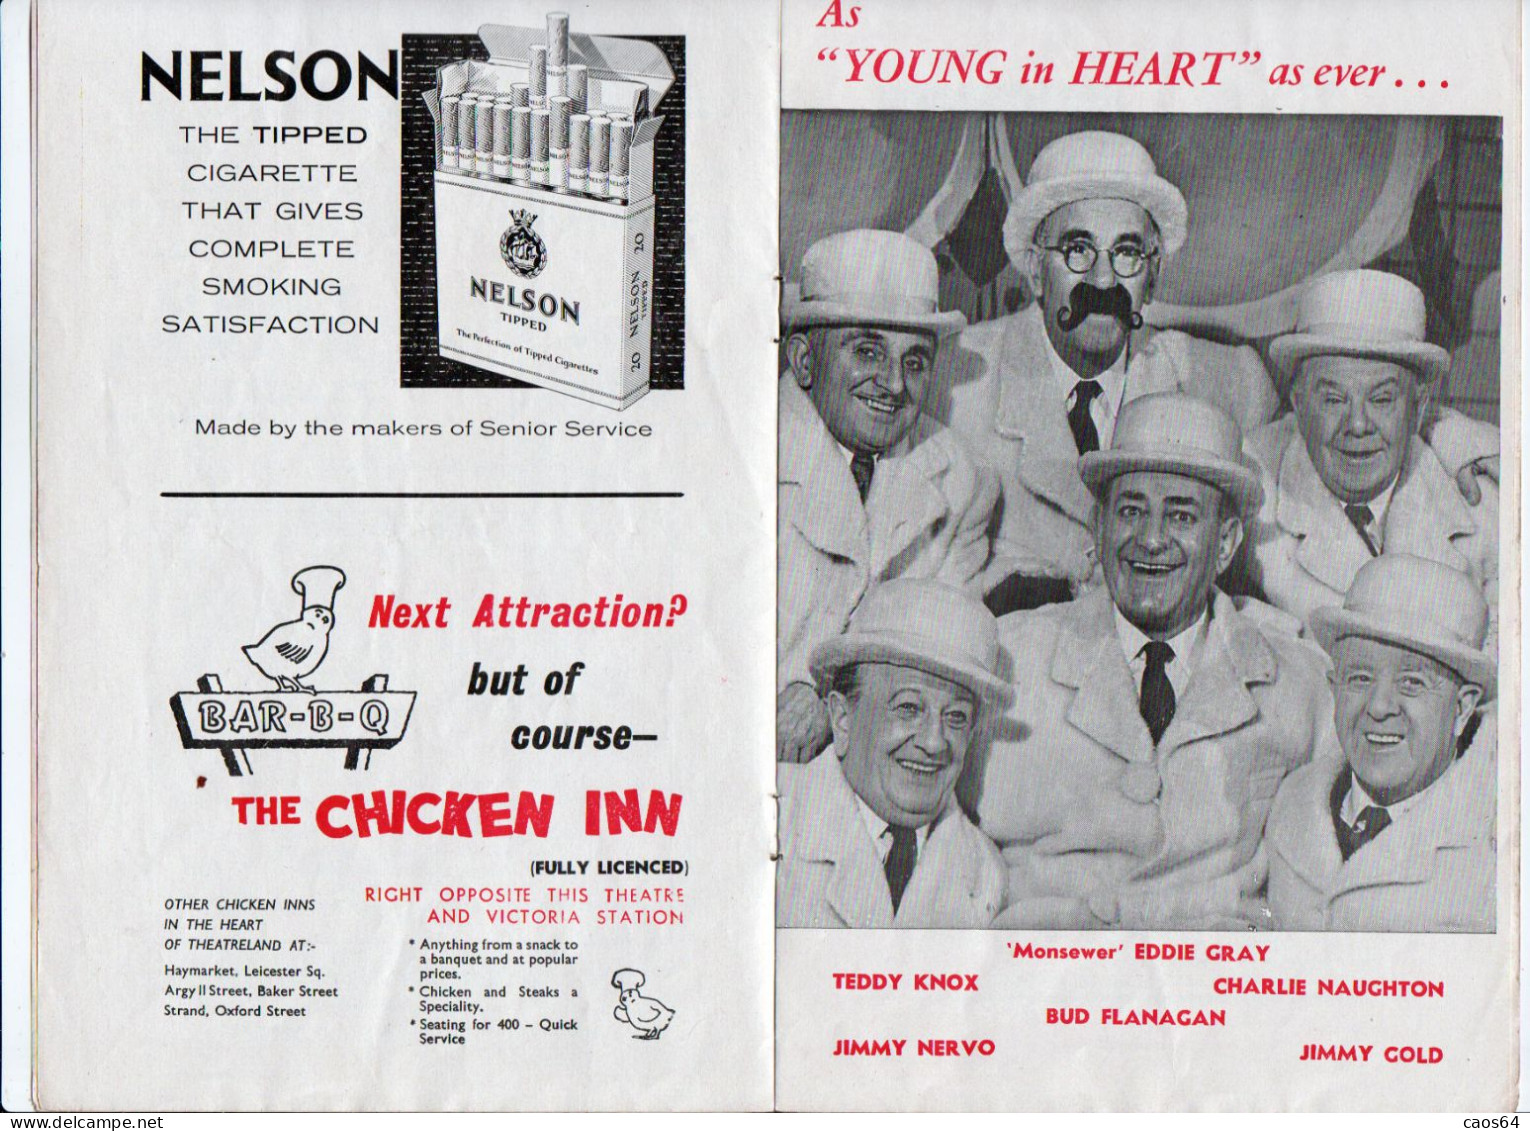 Brochure Victoria Palace Young In Heart Programme One Shilling 1960 - Programme